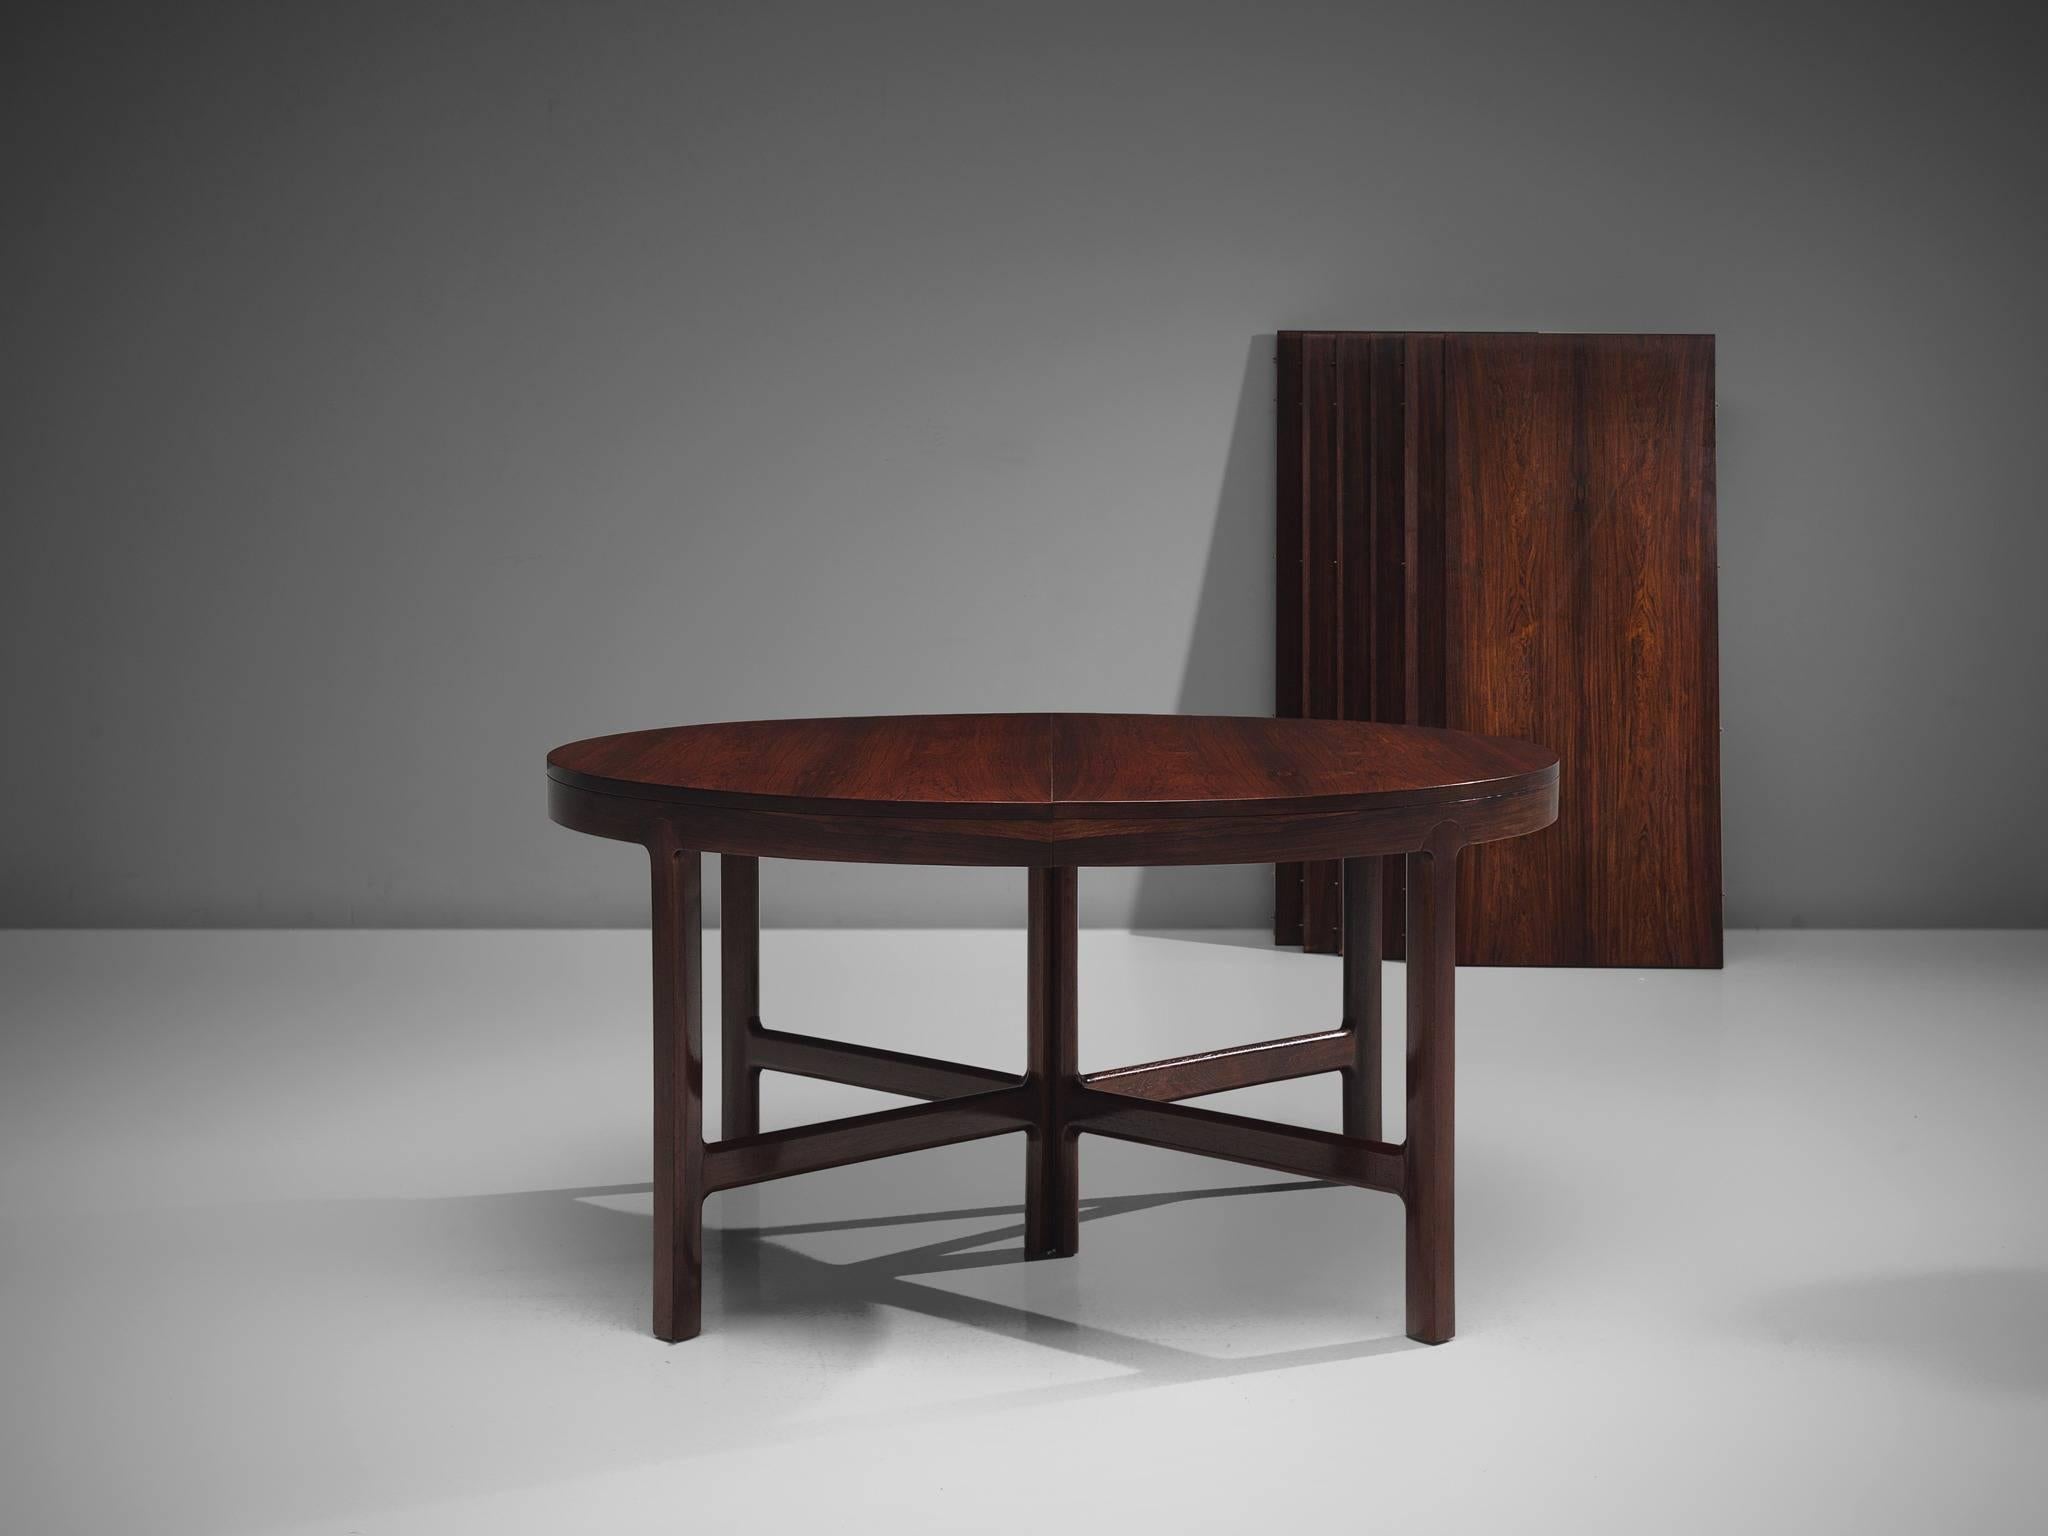 Unique Rosewood Table by Danish Master Cabinet Maker 4